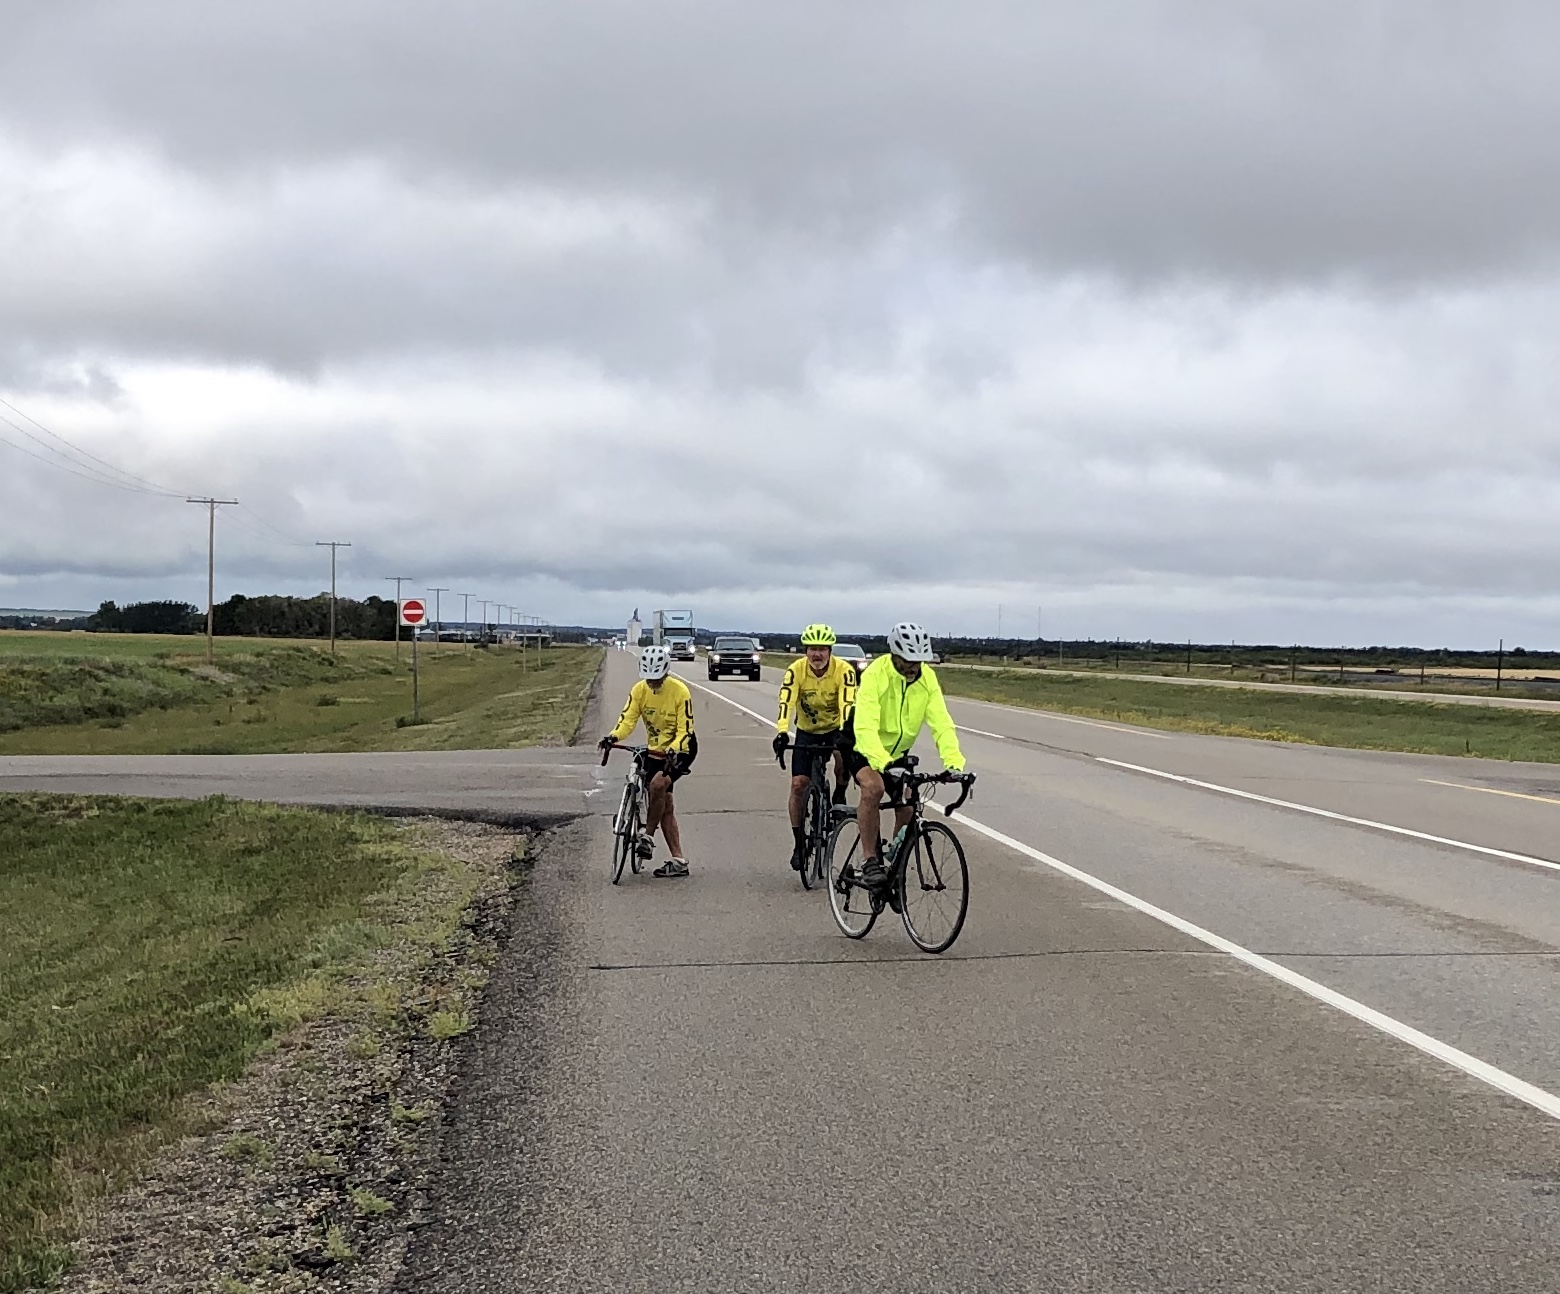 Day 31: East of Qu’Appelle to Moosomin – 149 KM